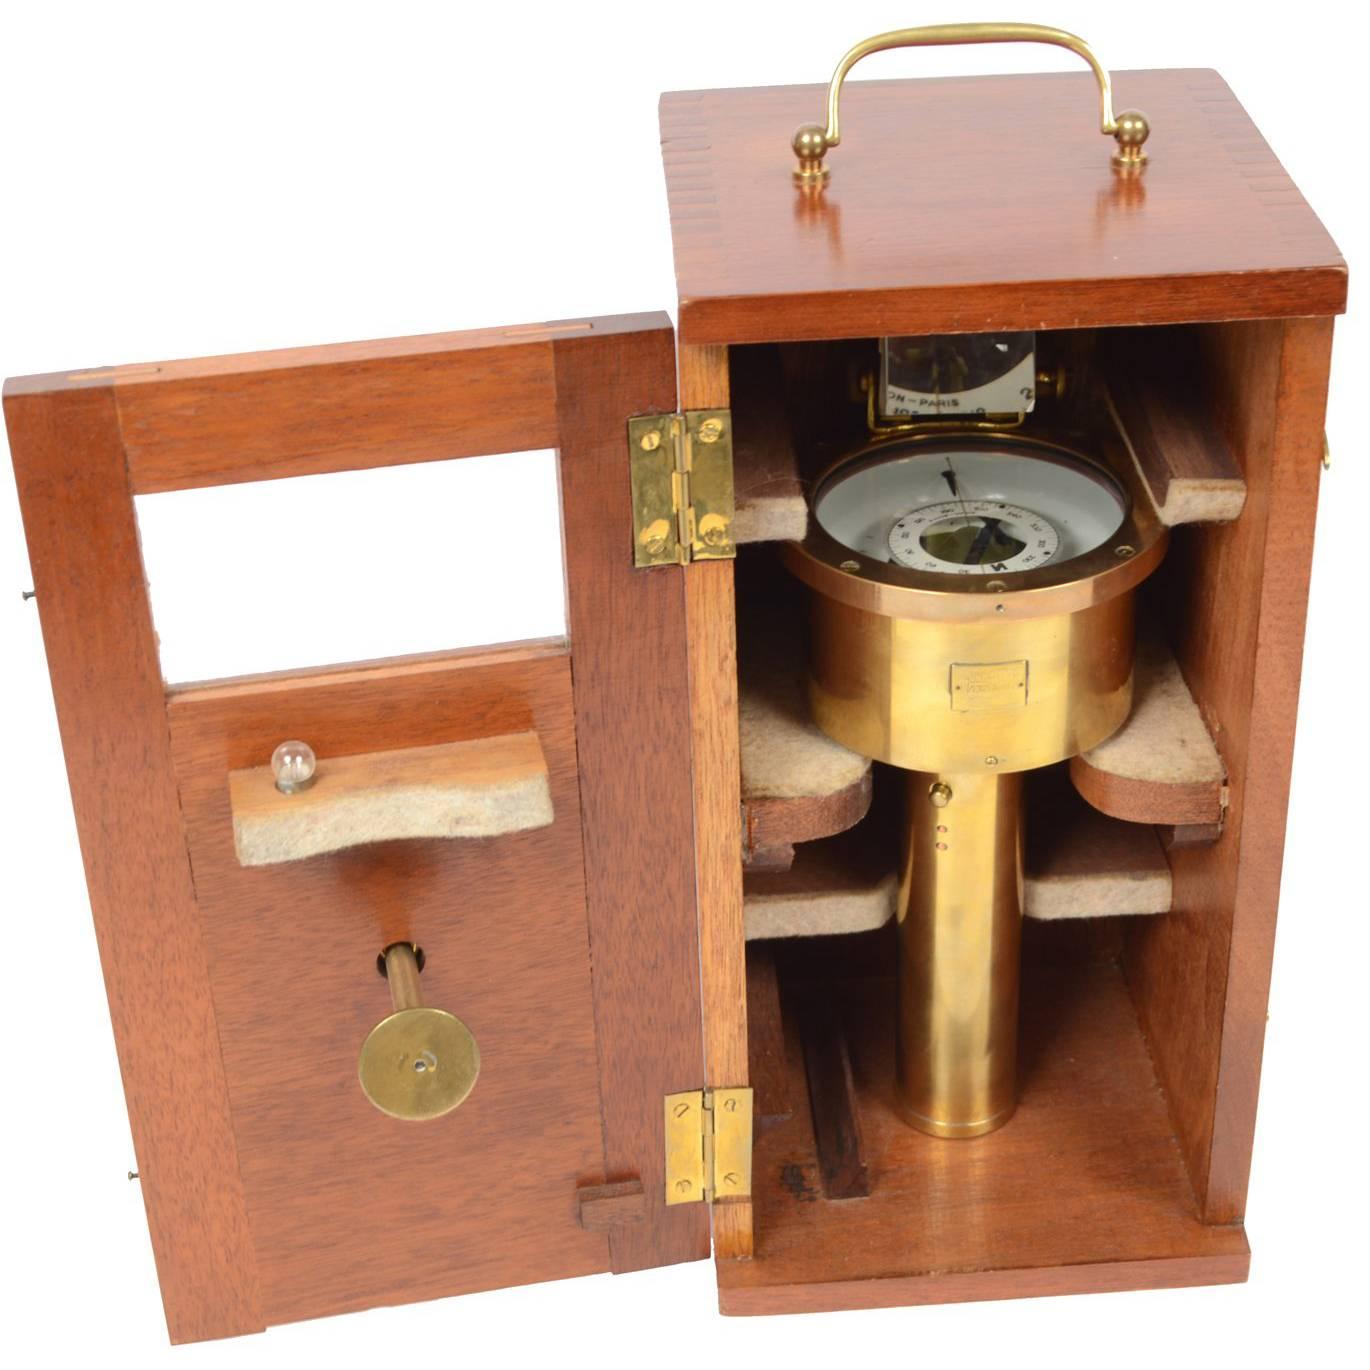 Antique and rare magnetic surveying compass, brass with original wooden box, signed E. Vion Paris, early 1900. Very good condition. Height of box cm 32 – inches 12.61. 
The firm Vion, that still works today, was established in 1830 in Paris and it